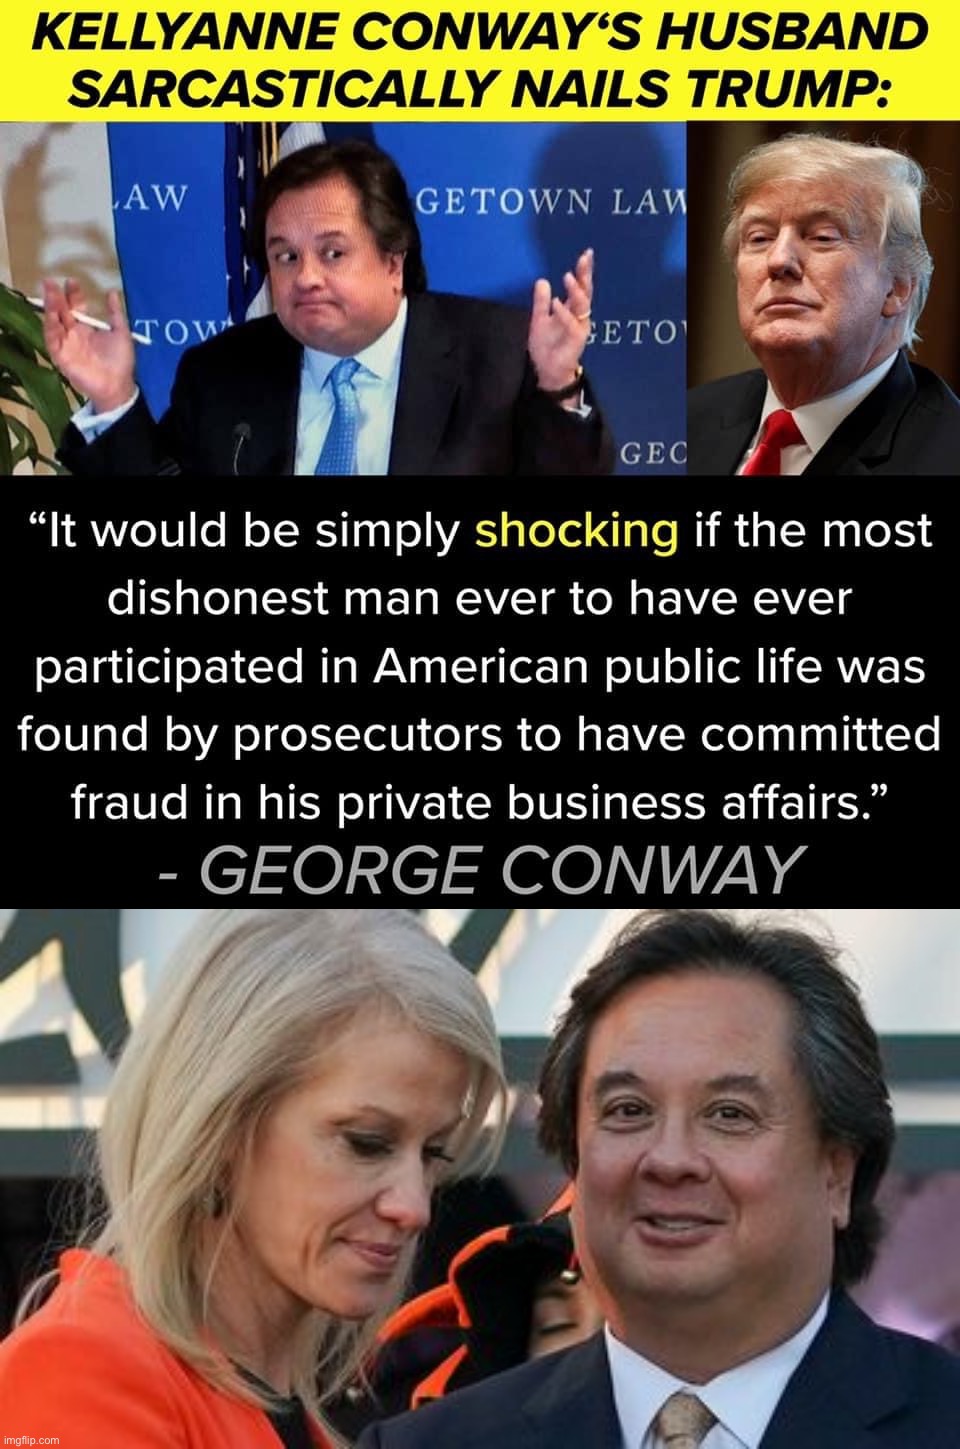 good roast, but also, I’m surprised she hasn’t stabbed him 23 times yet XD | image tagged in george conway roasts trump,kellyanne conway and george conway,kellyanne conway,trump is an asshole,trump is a moron,roasted | made w/ Imgflip meme maker